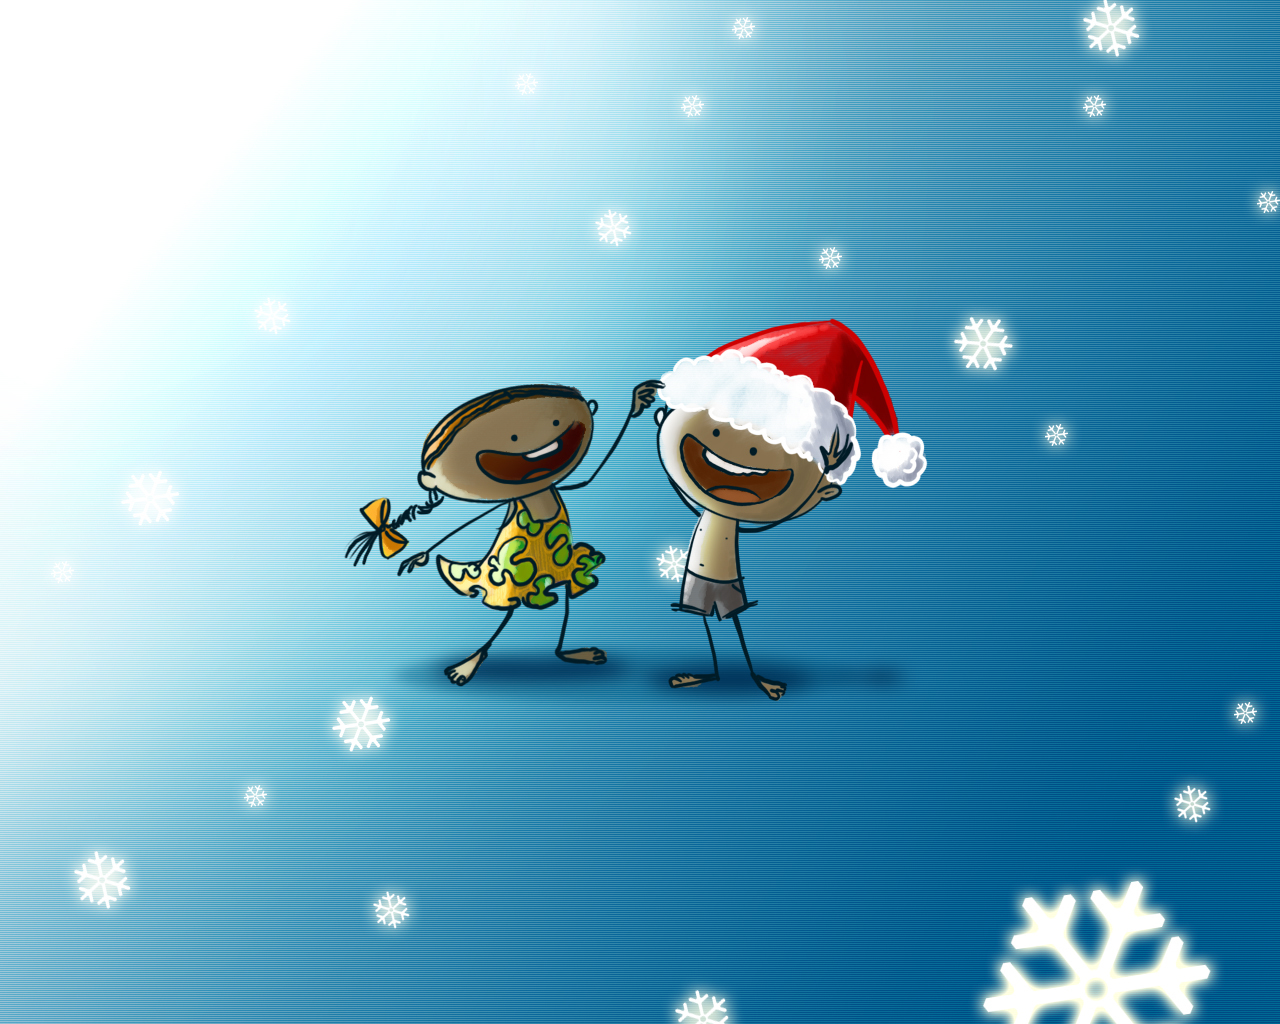 children, pictures, funny, holidays, new year, christmas xmas, turquoise 4K Ultra